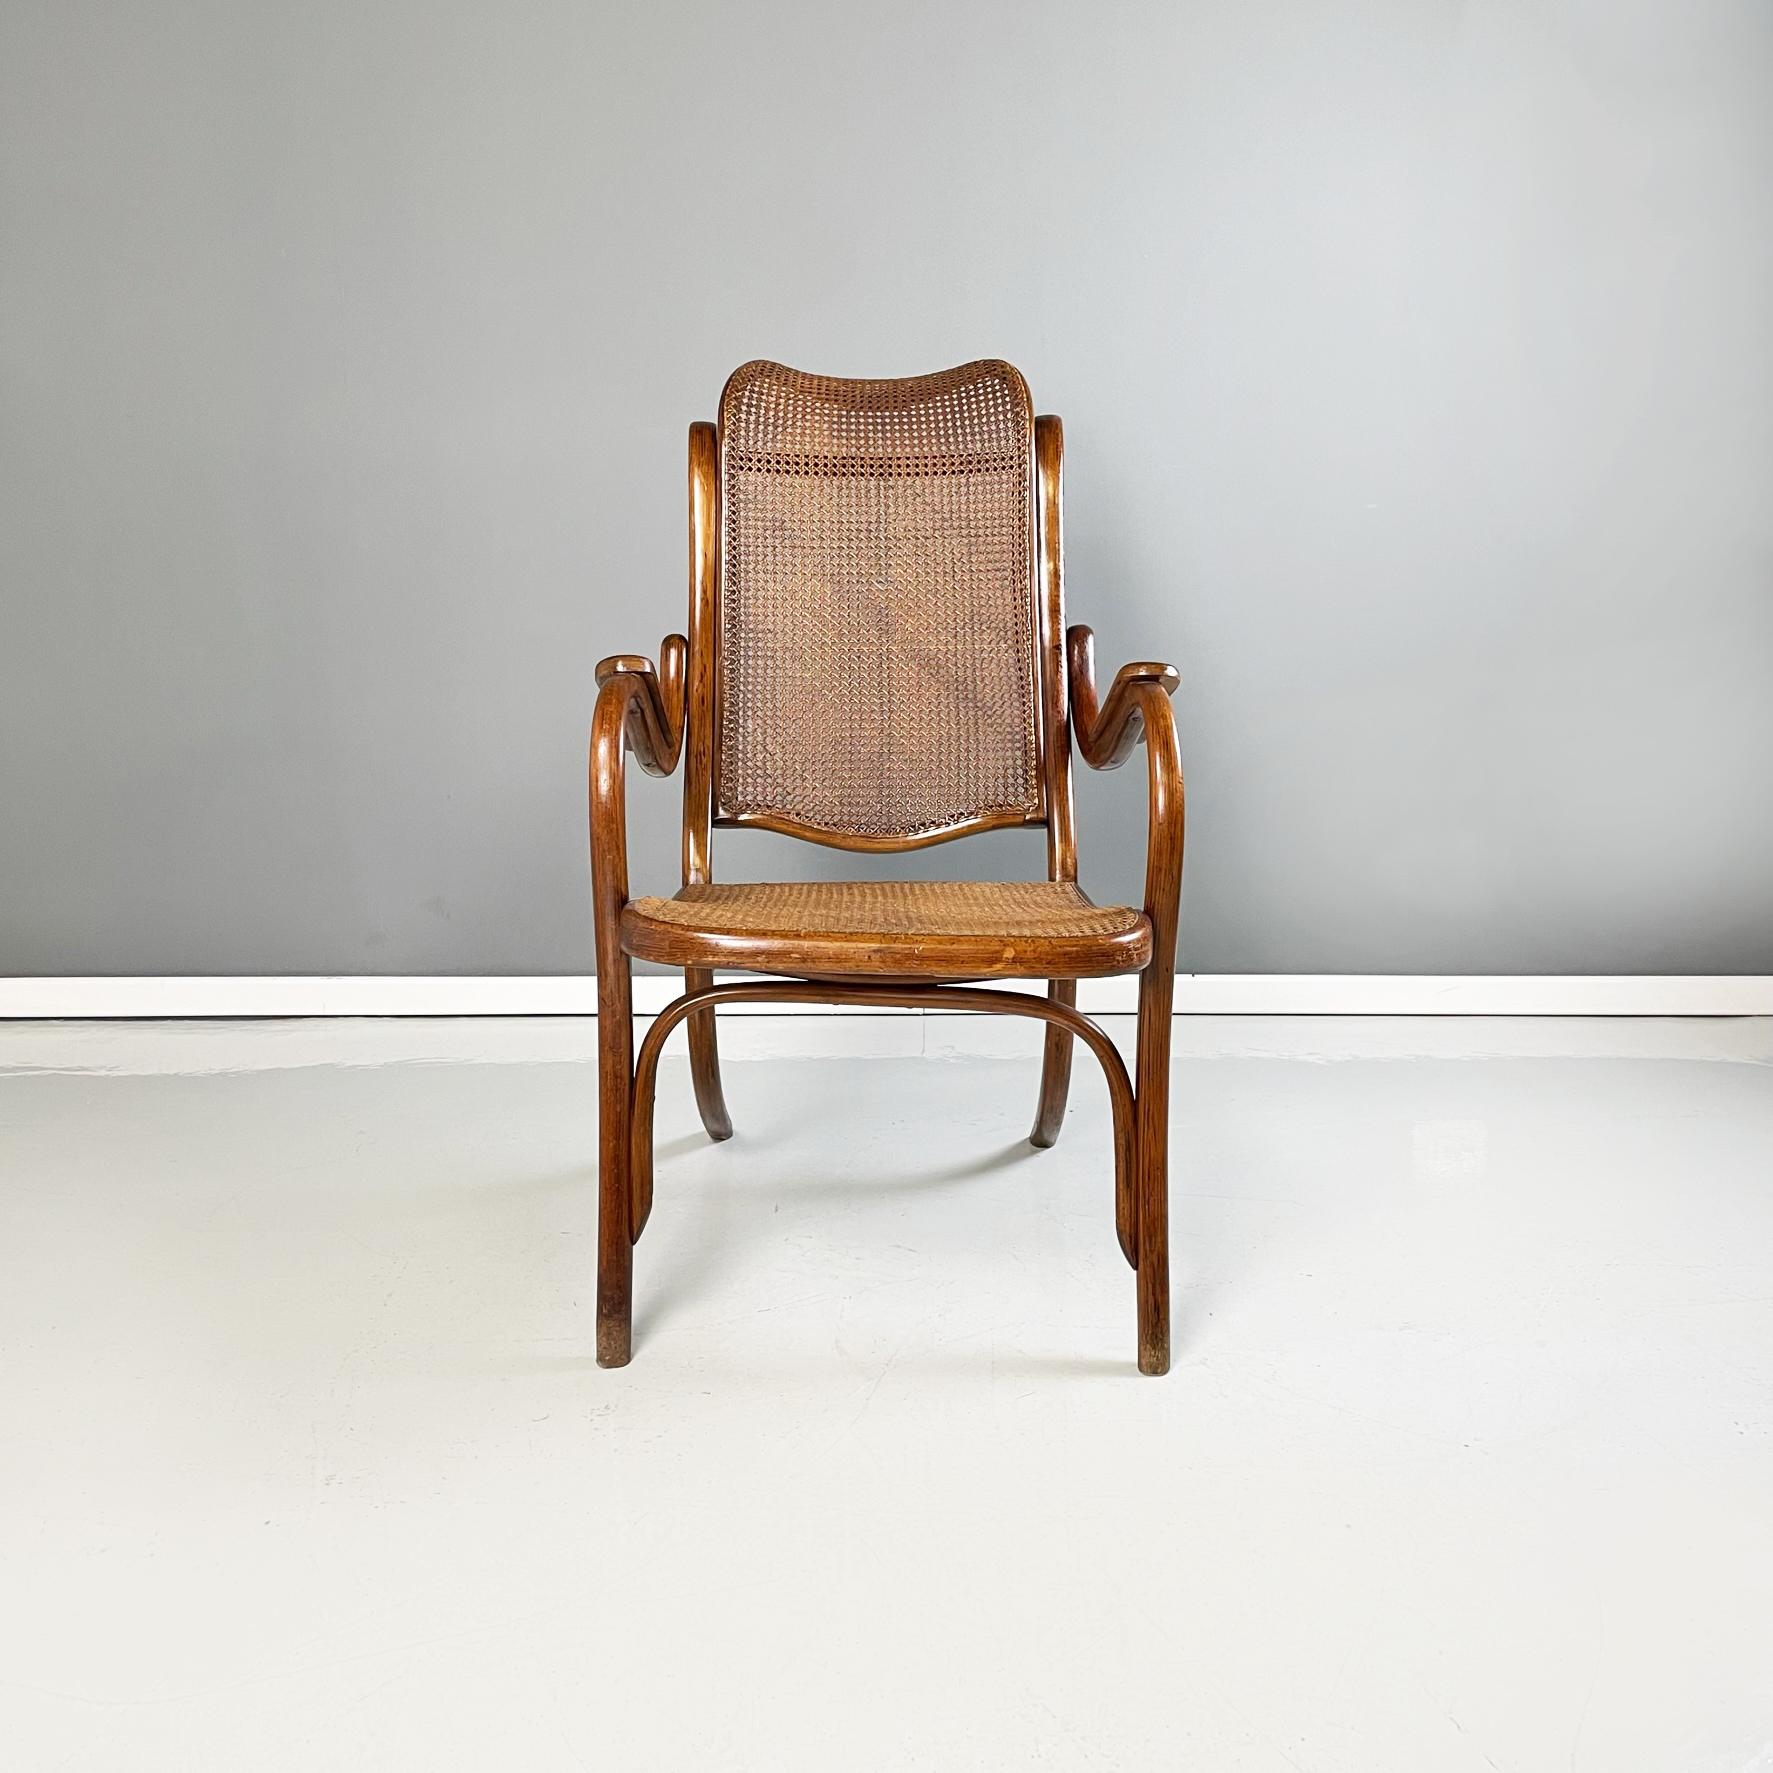 Austrian Armchair with dark brown straw and solid wood in Thonet style, 1900s
Armchair in Thonet style with structure in finely worked dark solid wood . The inclined backrest and the seat are in dark brown Vienna straw. Curved armrests